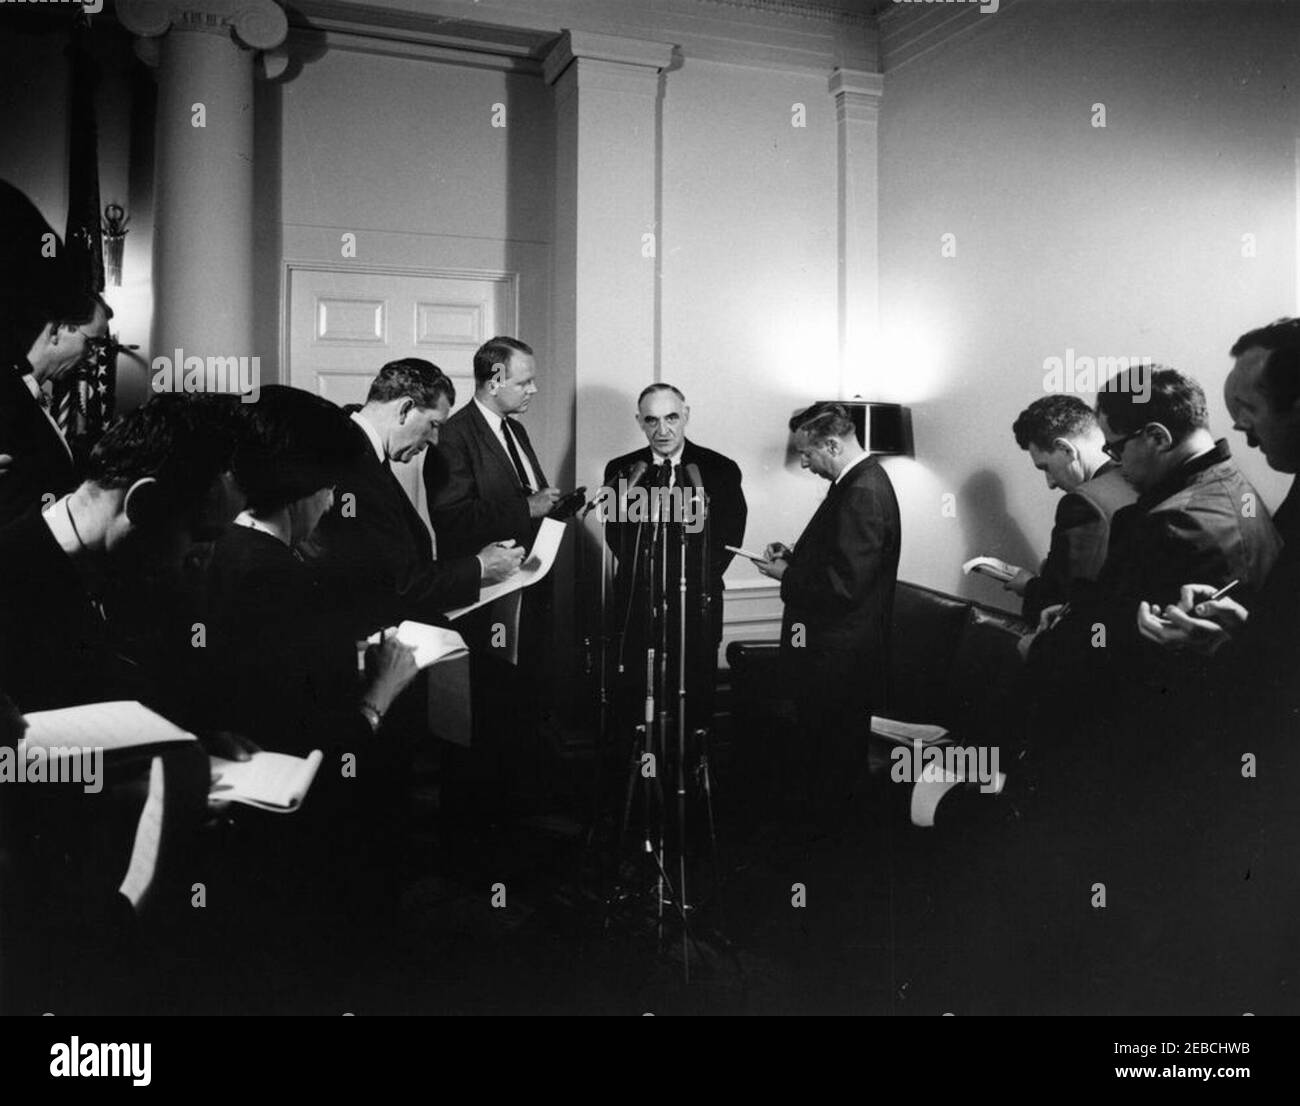 Gen. Lucius Clay talks to reporters upon his resignation as the Presidentu0027s Special Representative in Berlin. General Lucius Clay talks to reporters upon his resignation as the Presidentu0027s Special Representative in Berlin. White House, Washington, D.C. Stock Photo